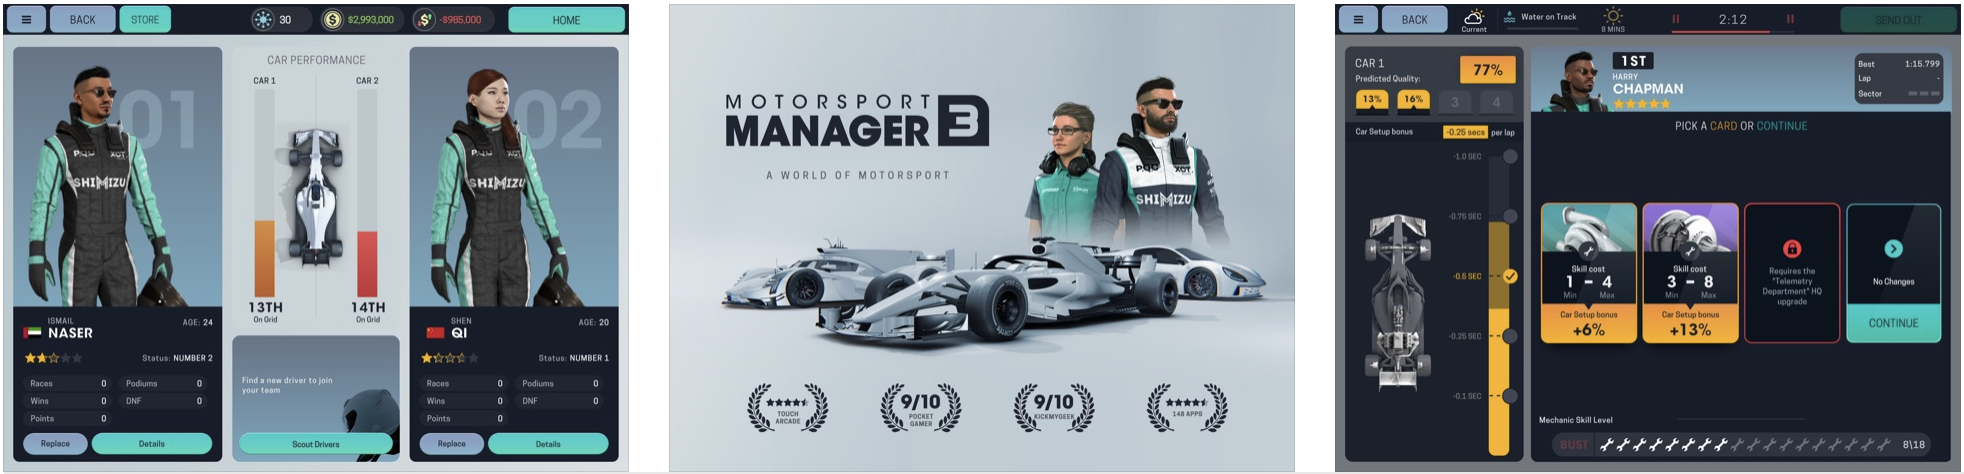 Deals of the day on the App Store: Motorsport Manager 3, It Happened In Outer Space, Stop Motion and more!